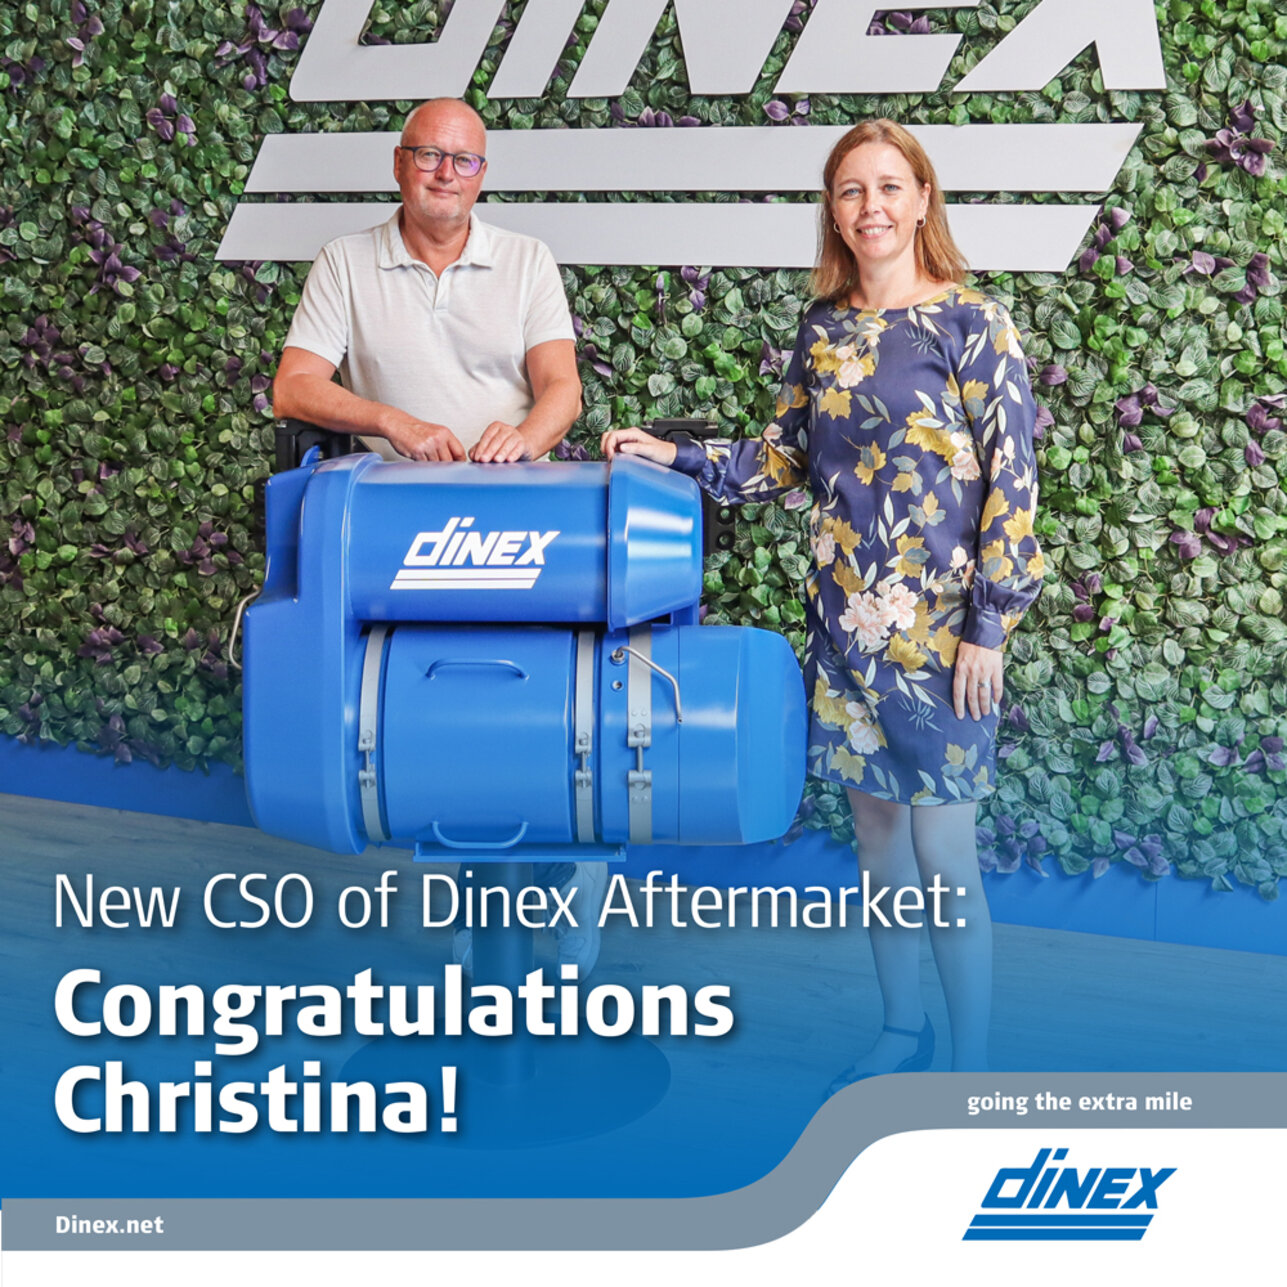 Welcome to our new Global CSO of the Aftermarket division - Torben Disensen, CEO Dinex Group and Christina Jørgensen, CSO, Global Aftermarket